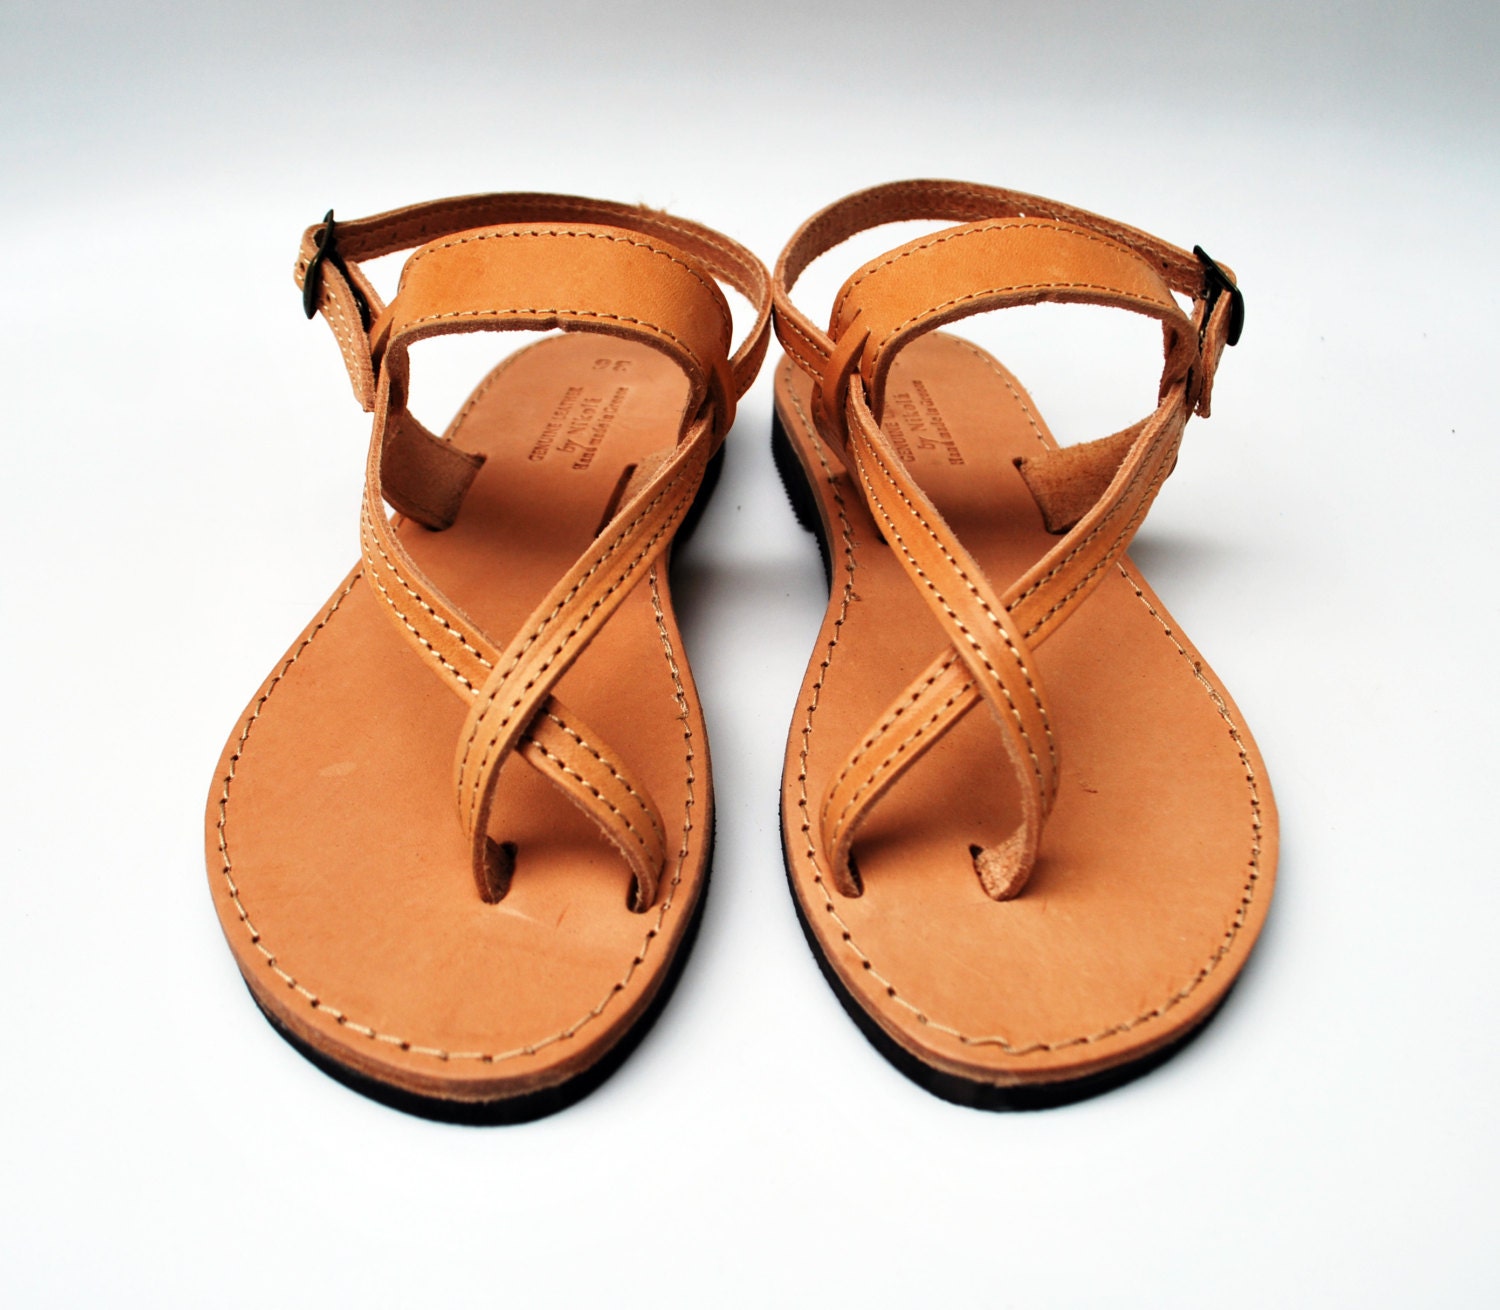 Women Sandal in Natural Brown Color made with 100% Genuine